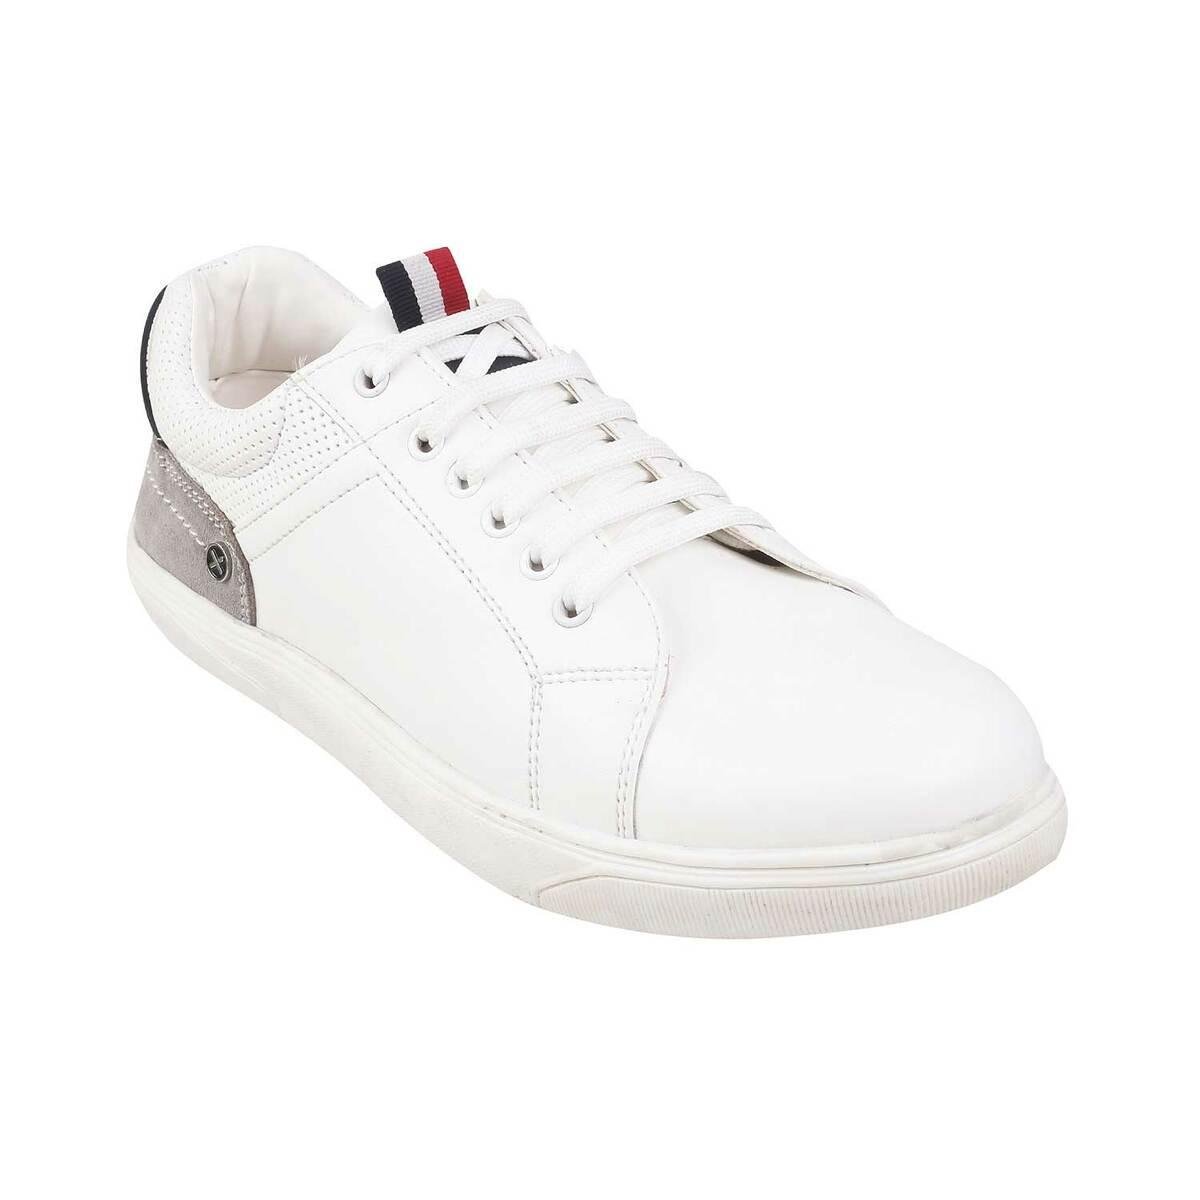 Murphy Low Top White Leather Sneakers For Men - The Jacket Maker